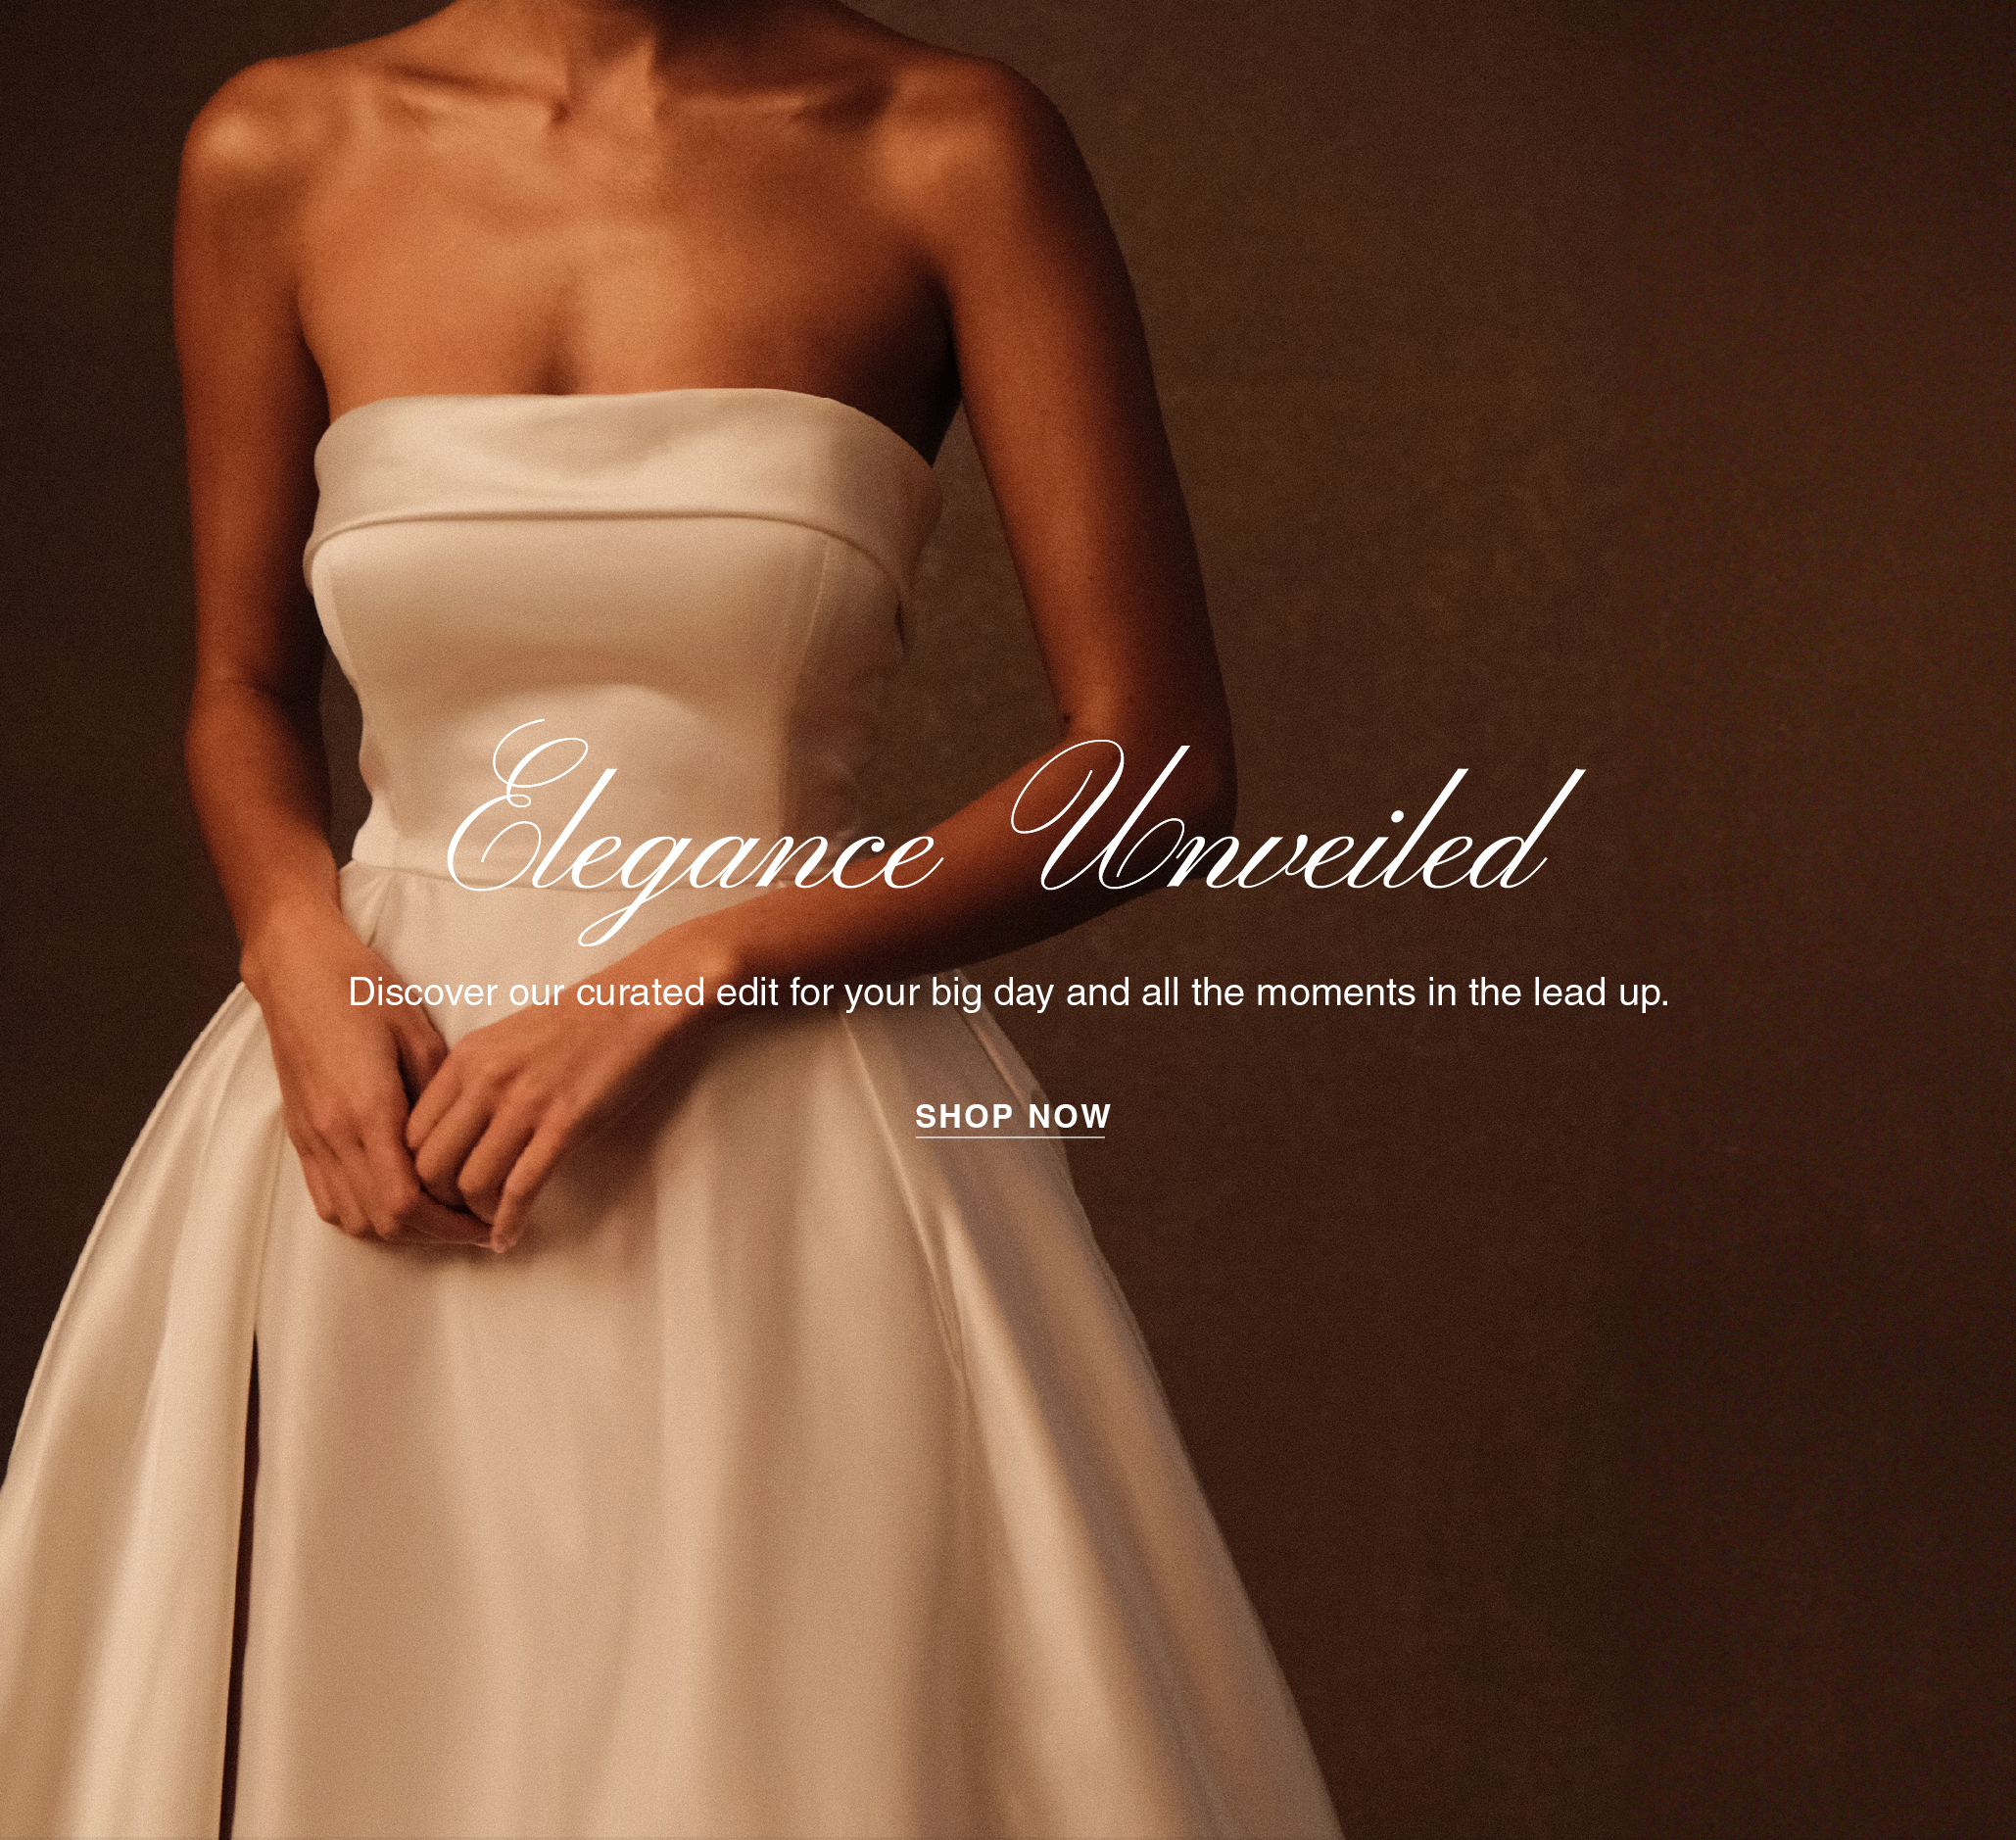 corset, 13 Wedding Dresses Ads For Sale in Ireland